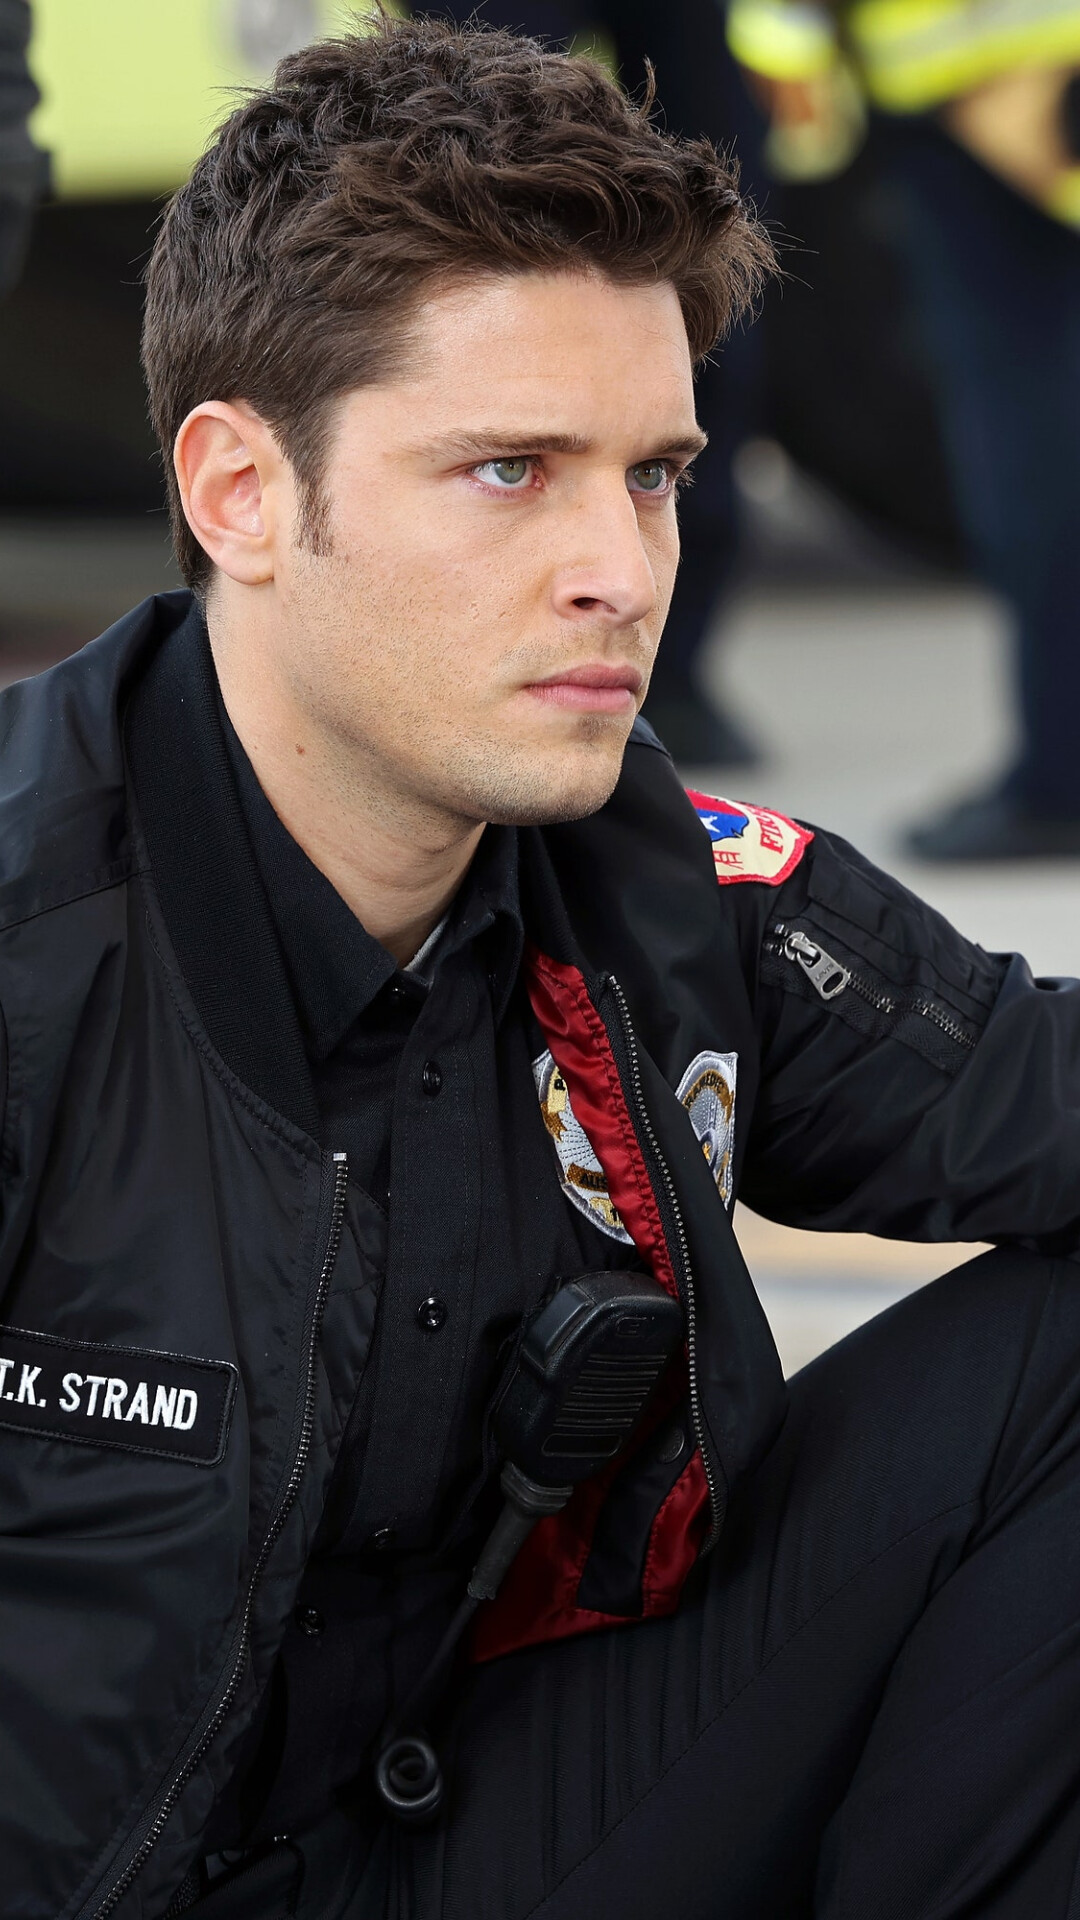 9-1-1: Lone Star (TV Series): Tyler Kennedy "TK" Strand, A Firefighter And Later A Paramedic Within The 126 Team. 1080x1920 Full HD Background.